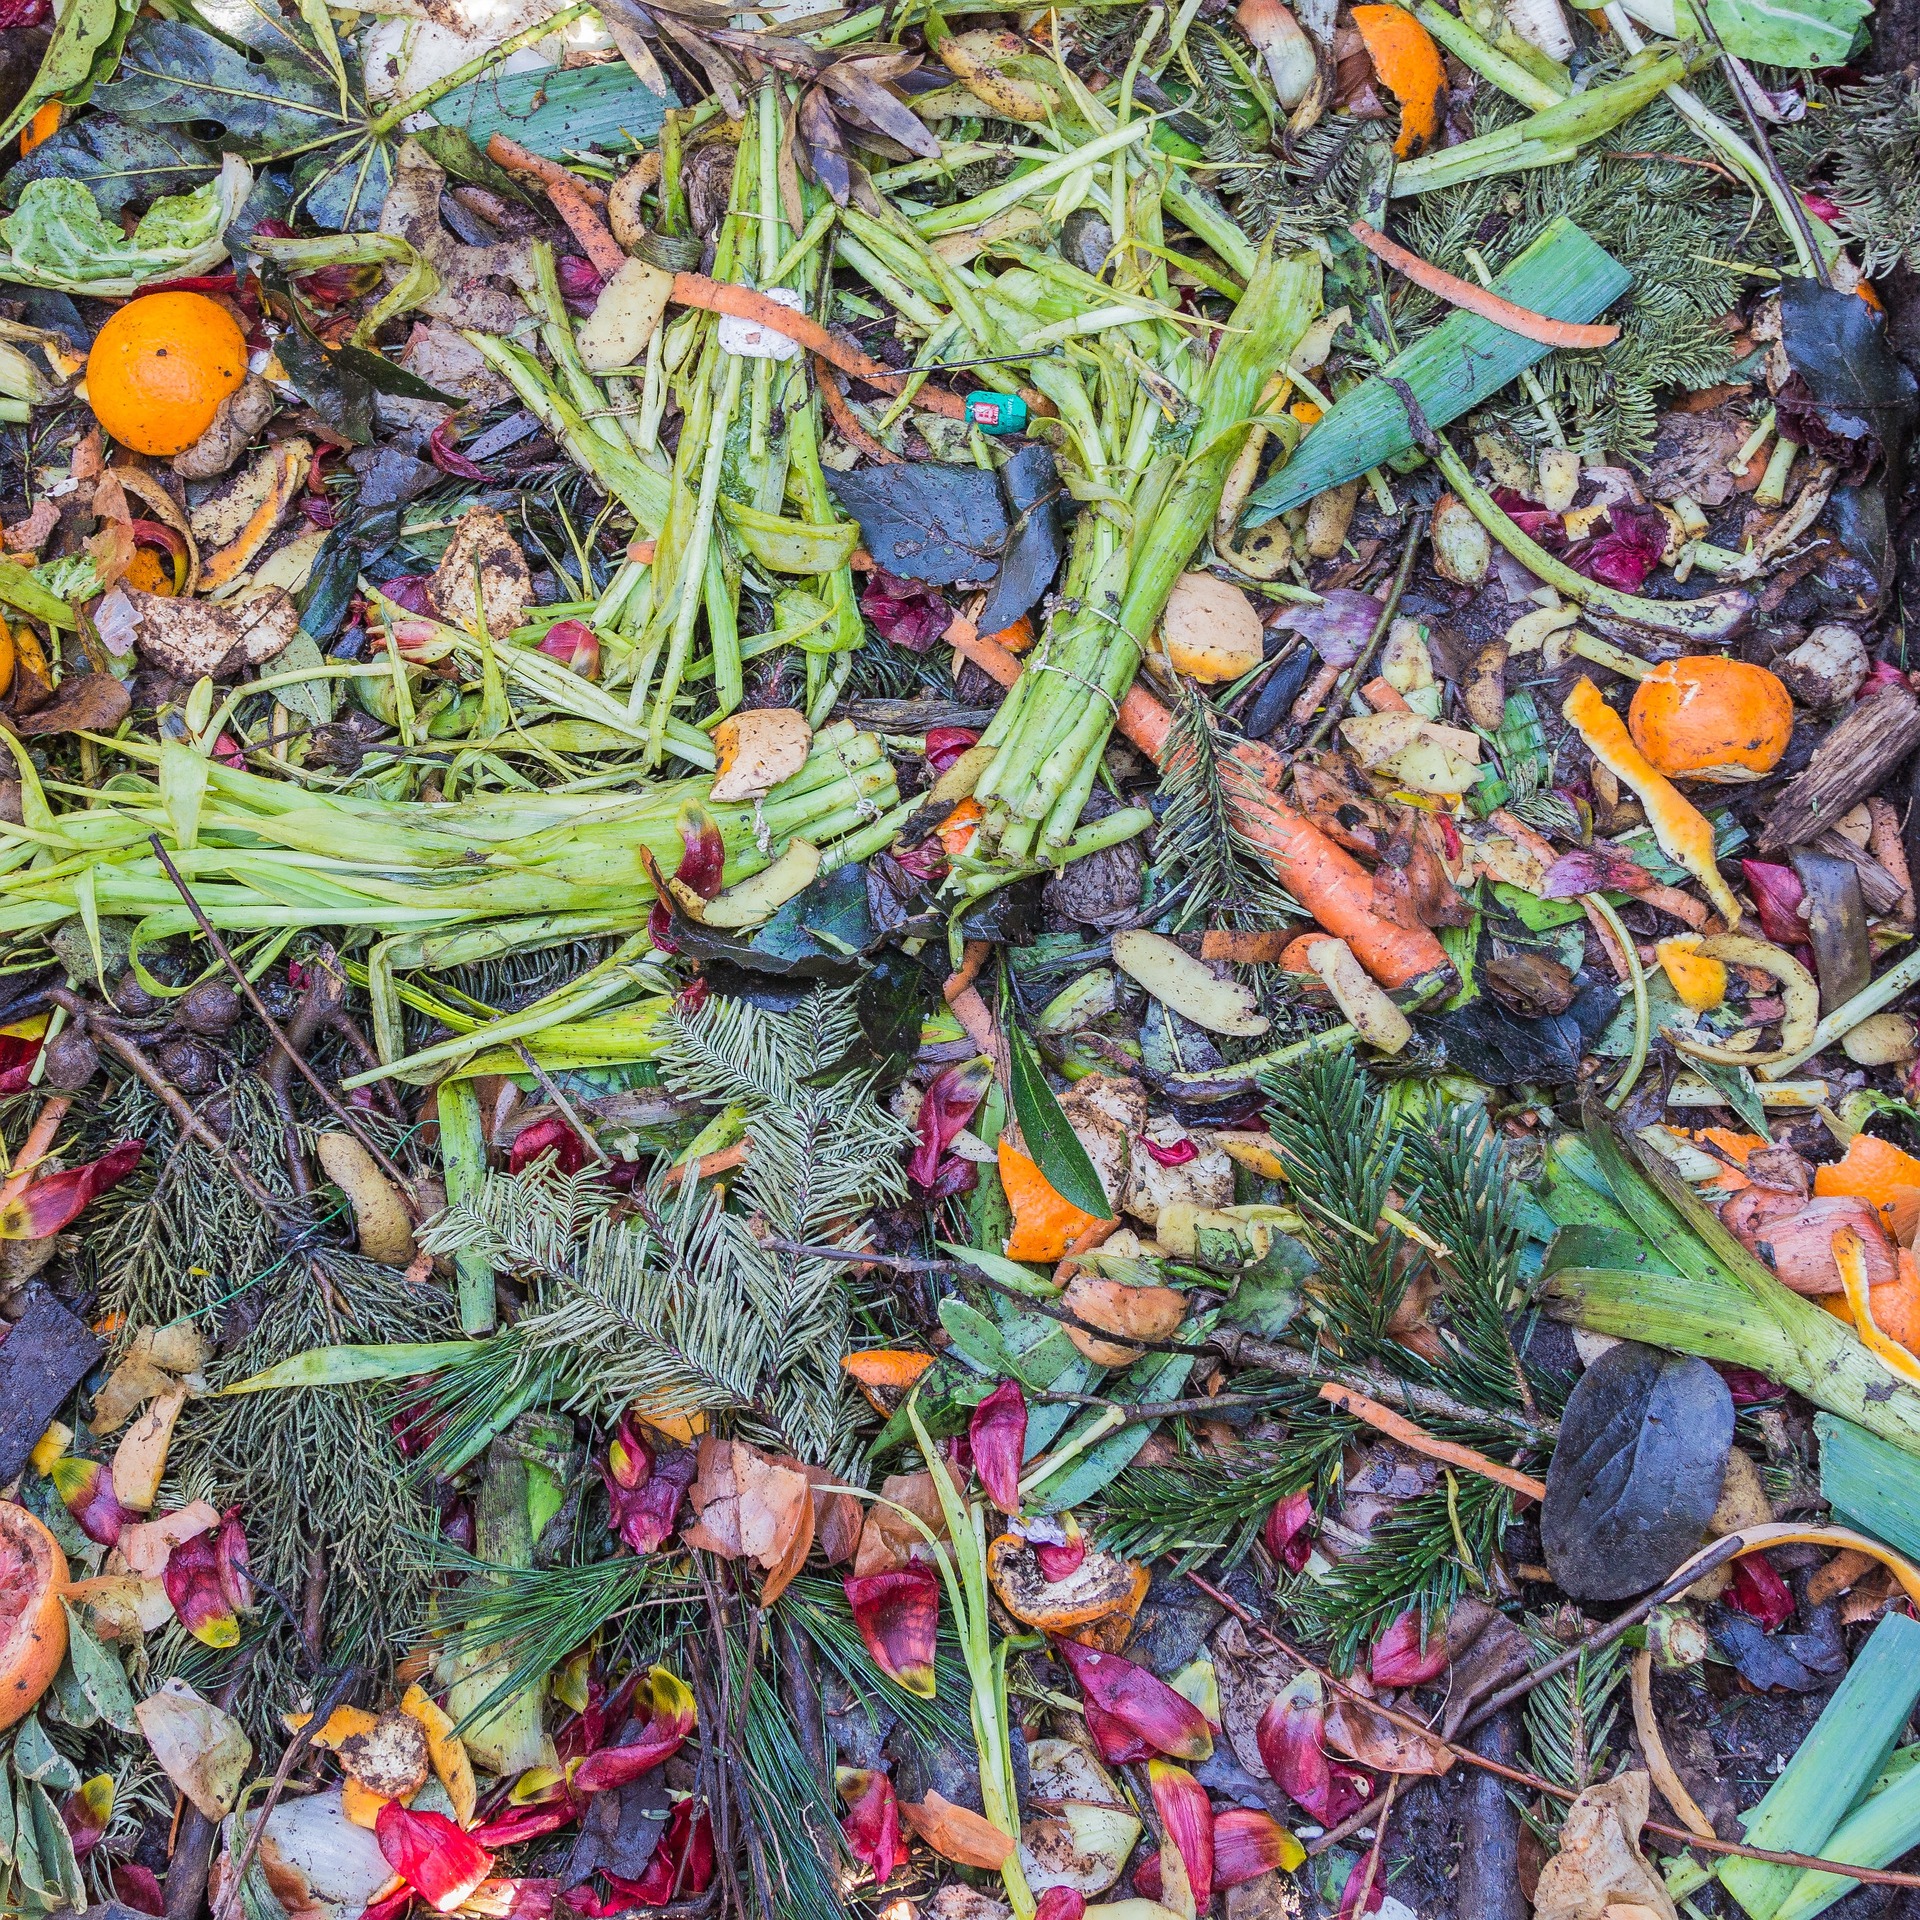 Vegetable waste on a compost heap